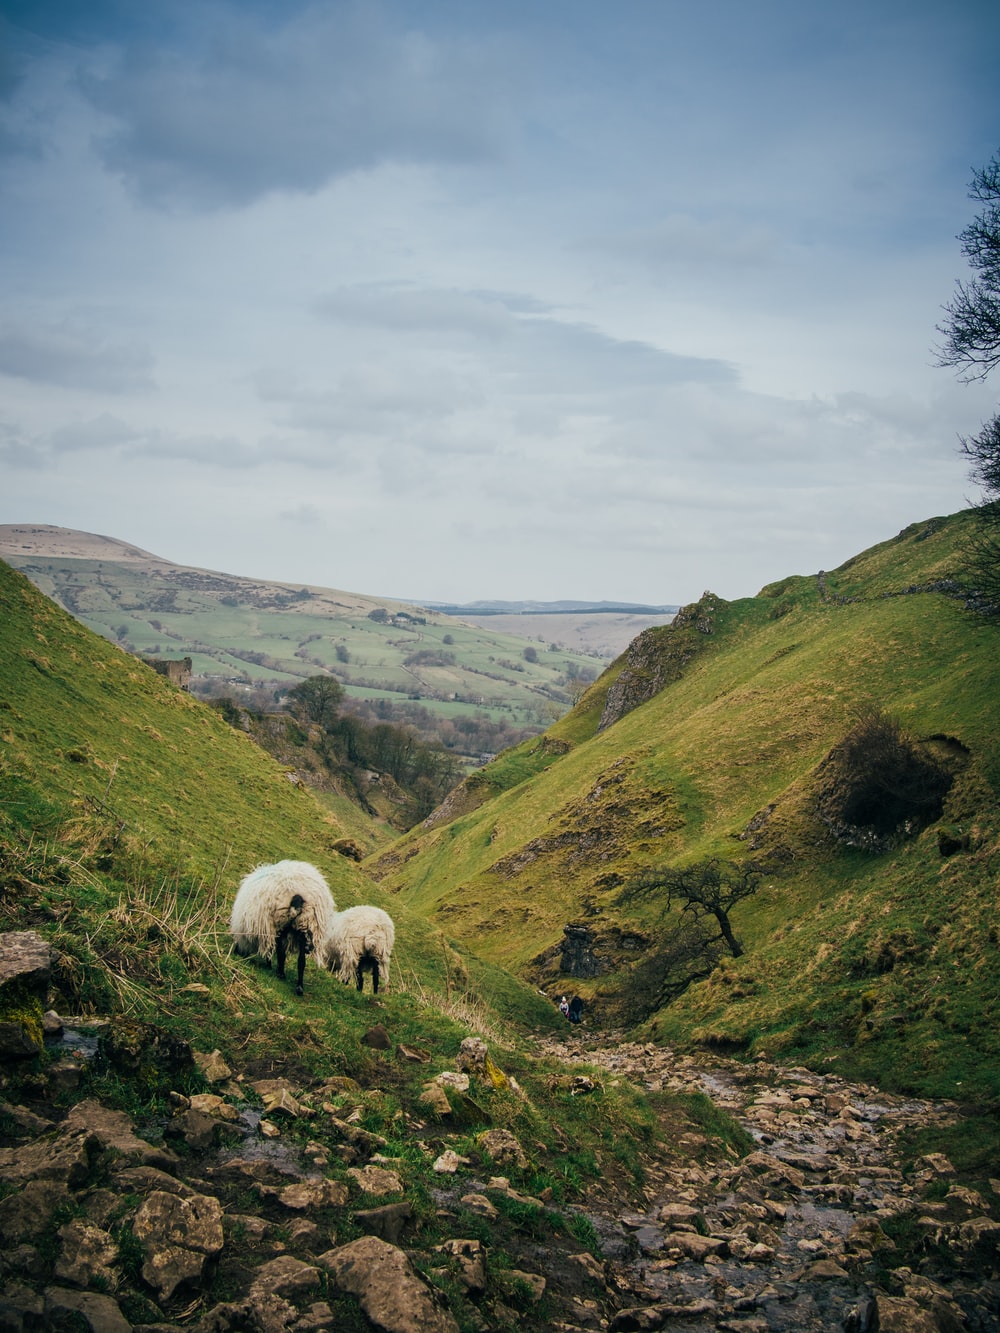 Derbyshire Picture. Download Free Image